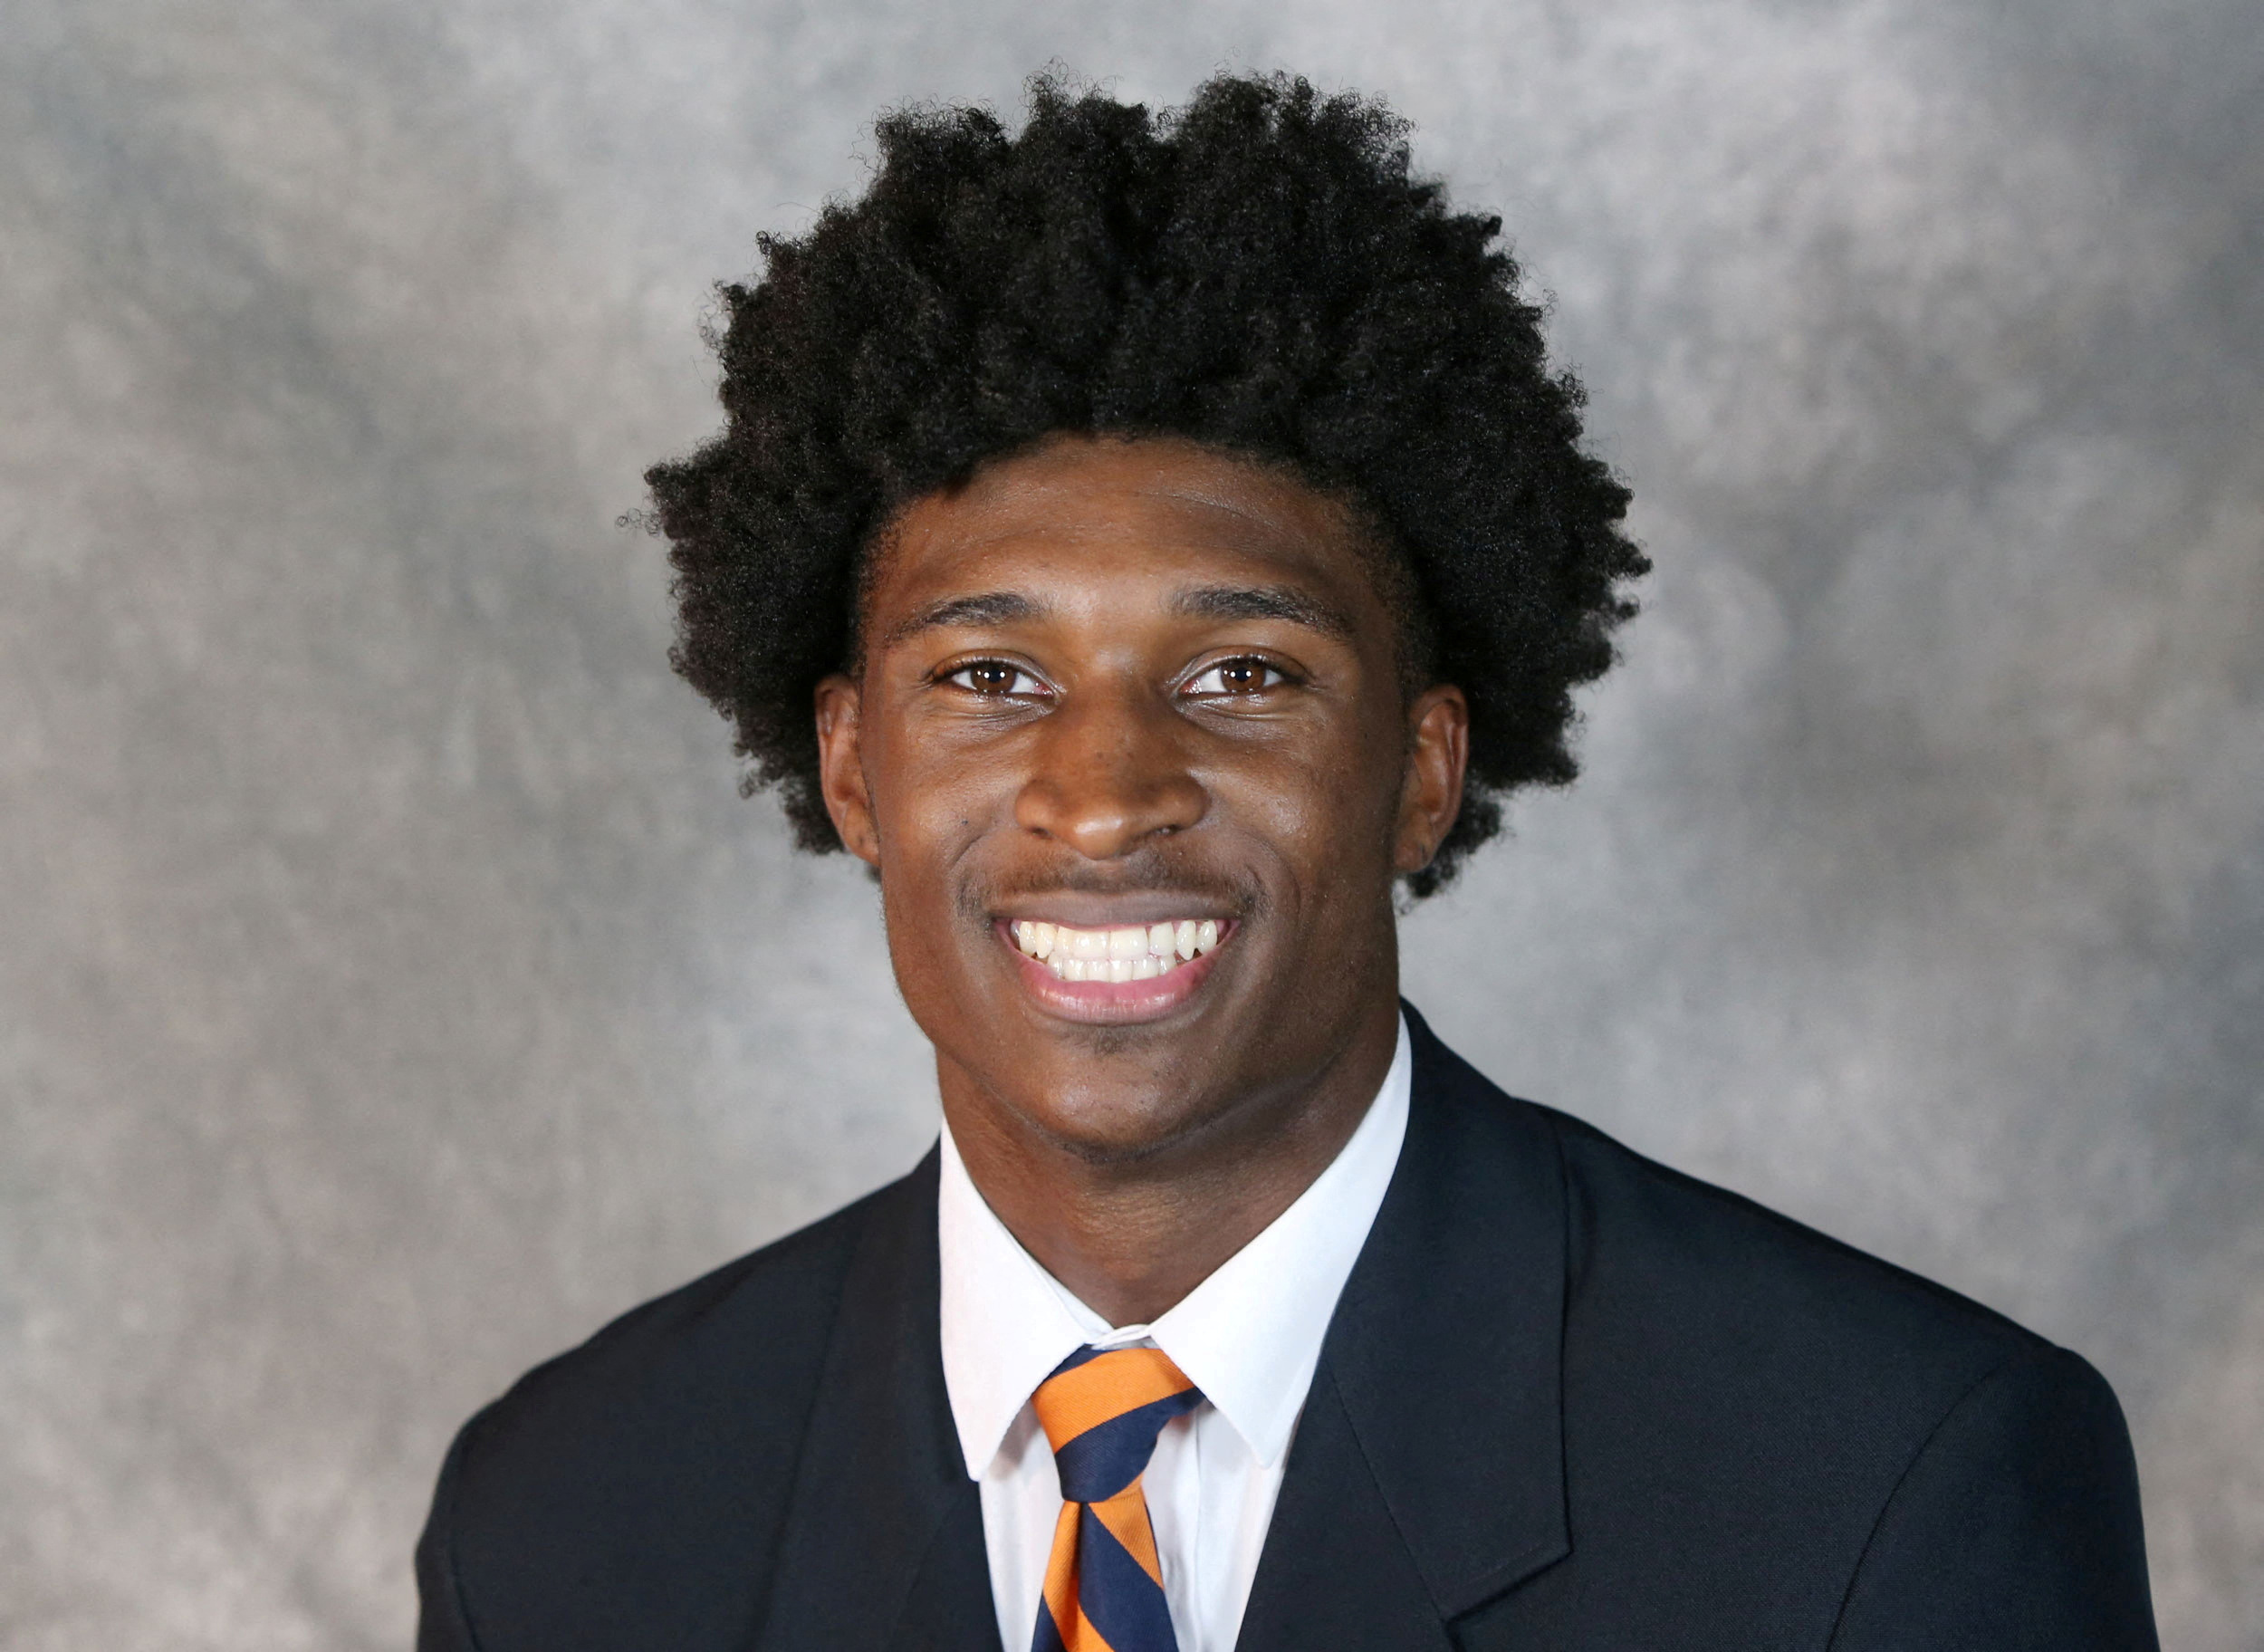 A handout picture shows college football player Lavel Davis Jr. who was killed in a shooting attack at the University of Virginia